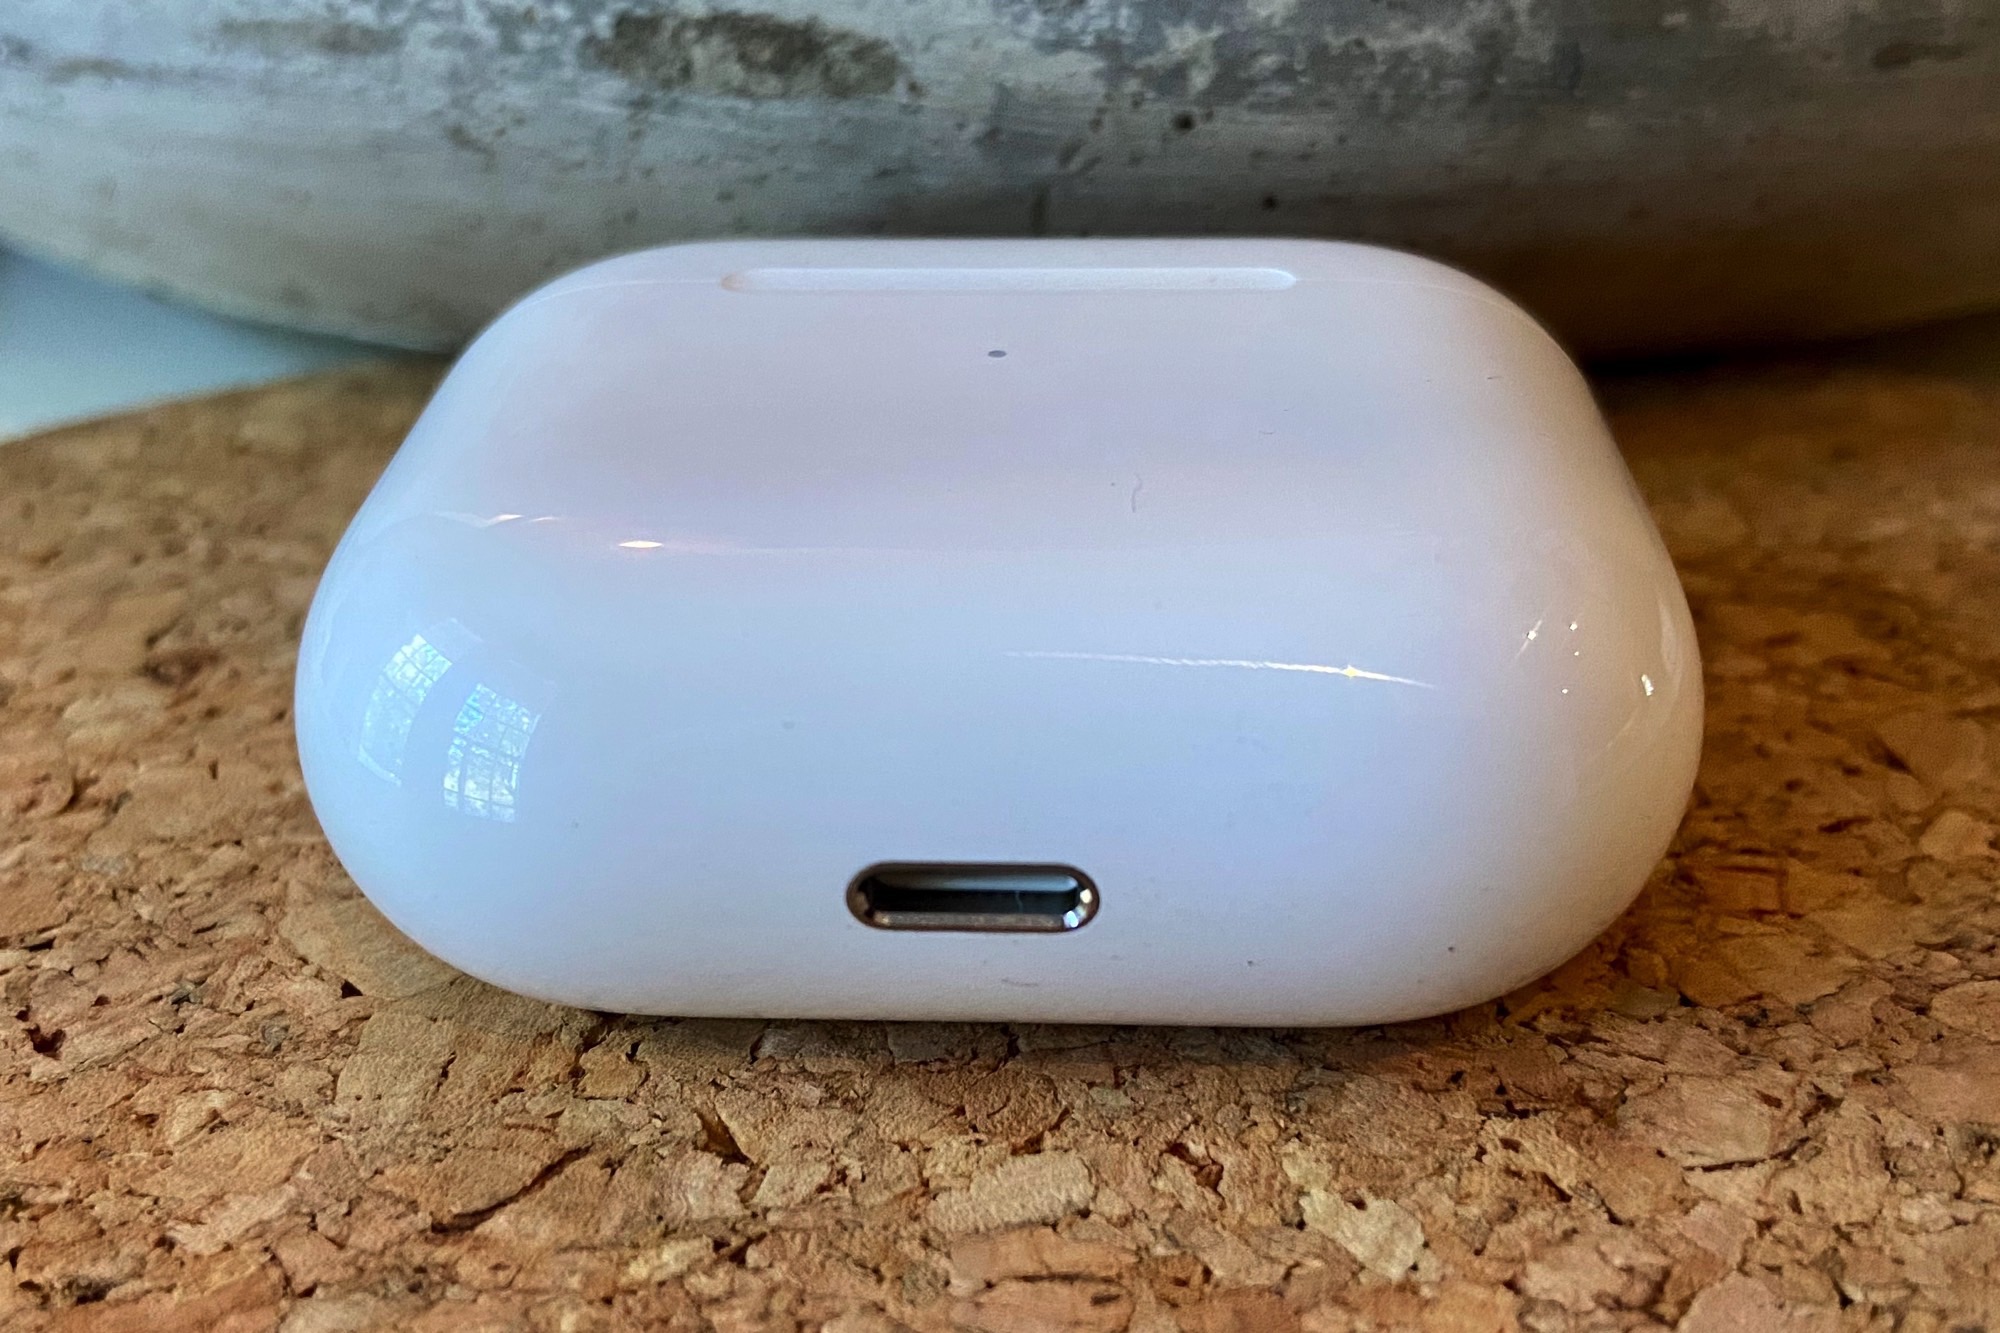 Apple AirPods 3 review: solid revamp with better fit and longer battery, Apple